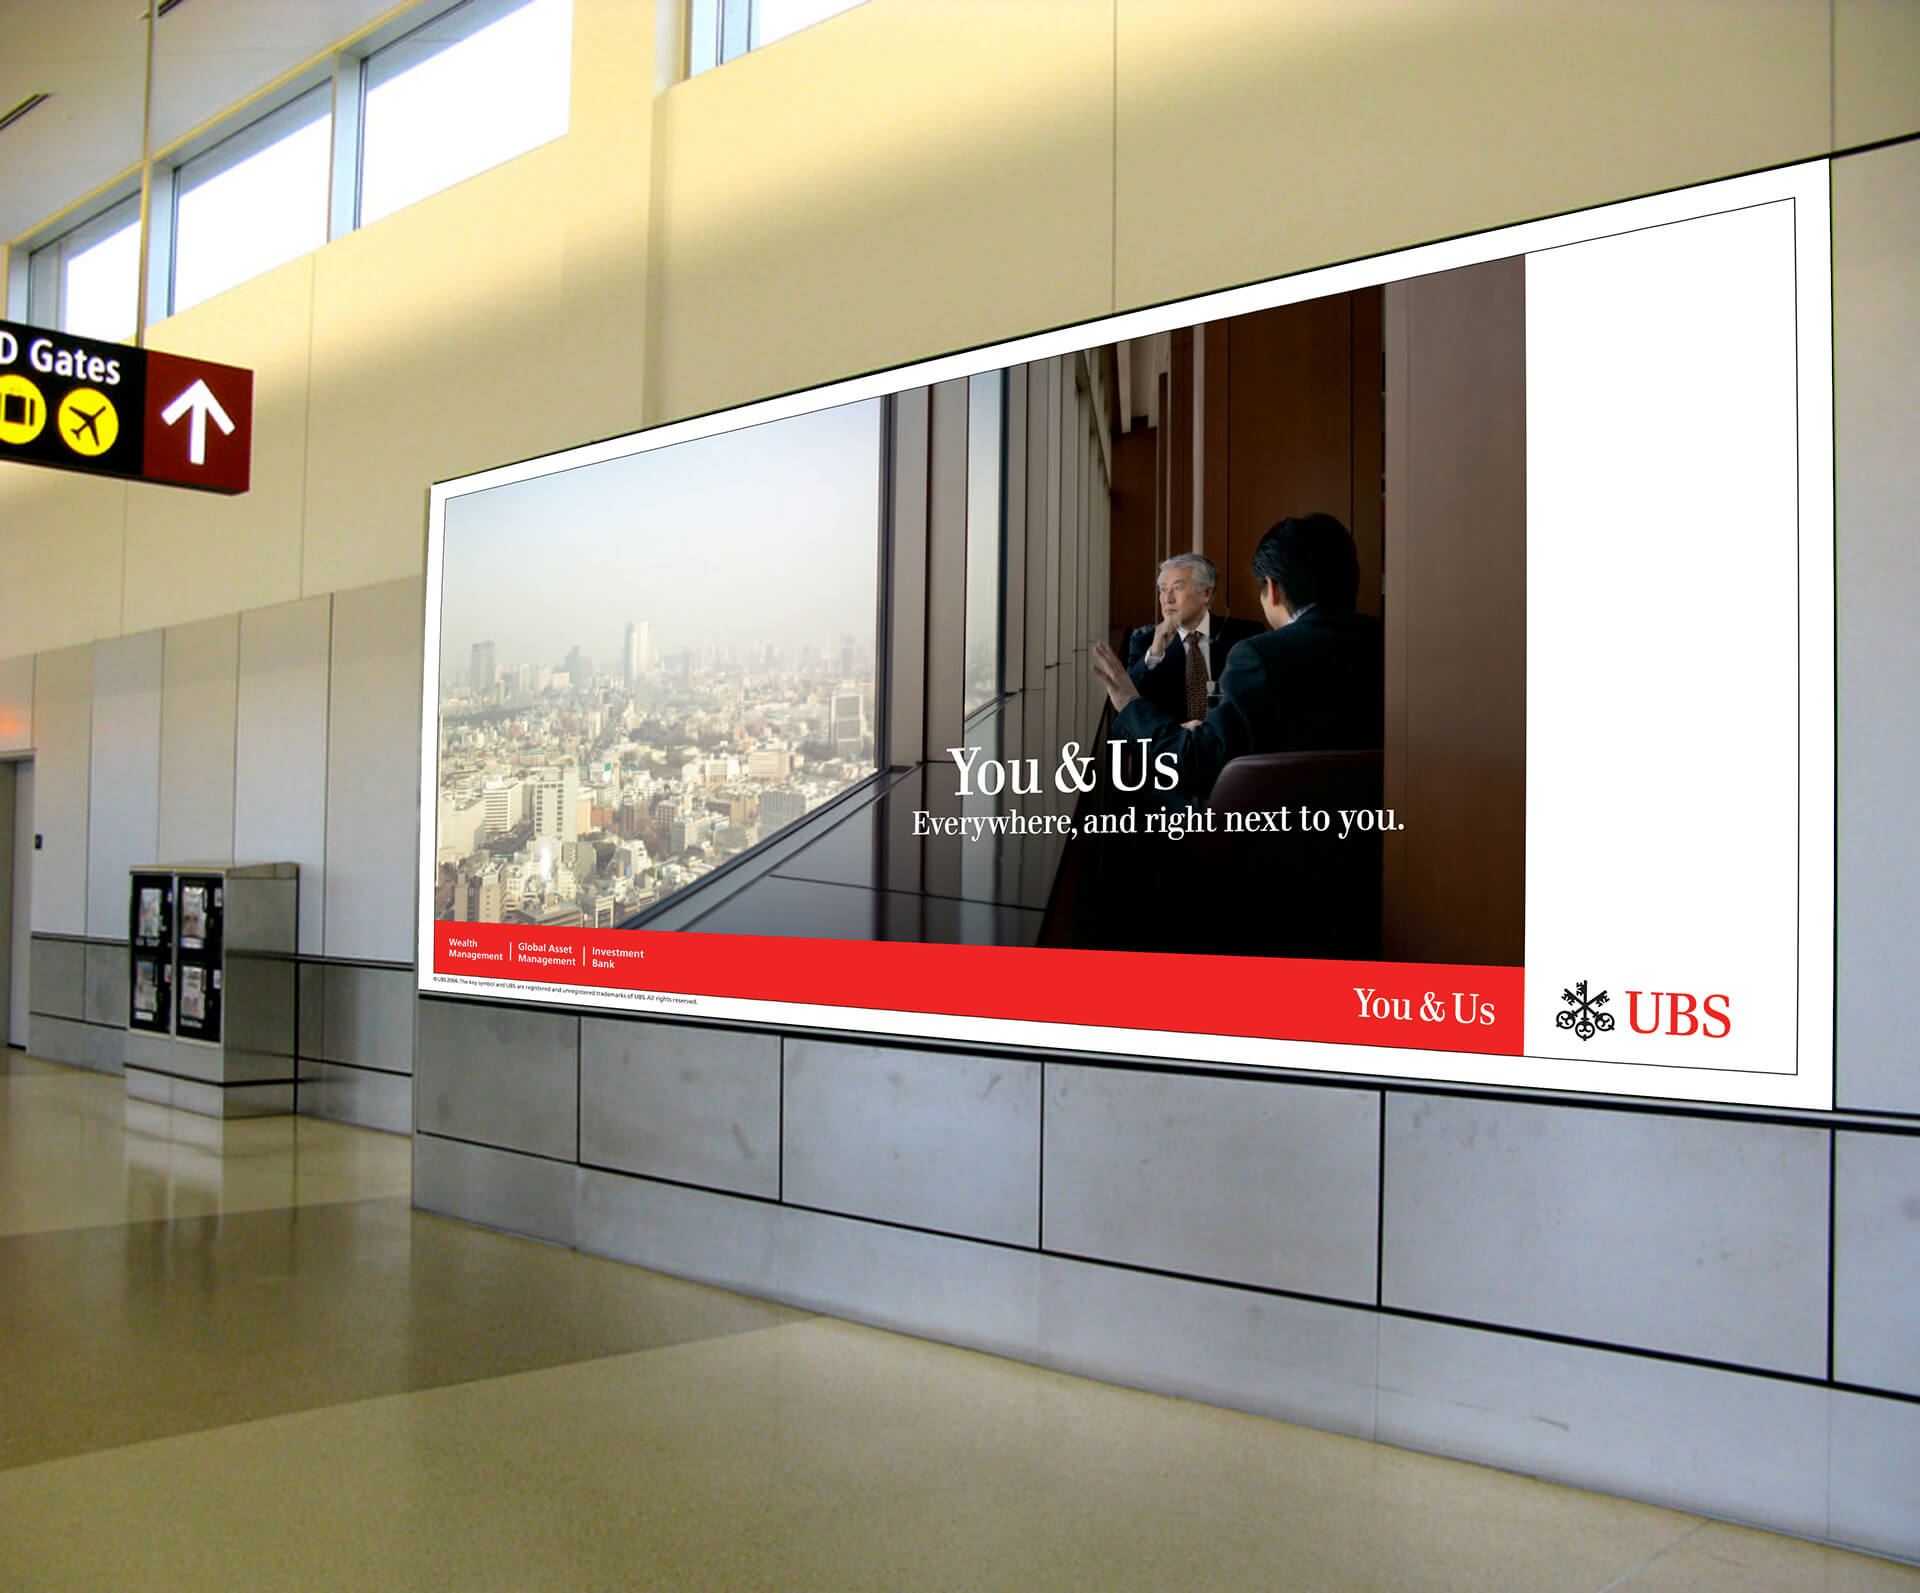 UBS airport